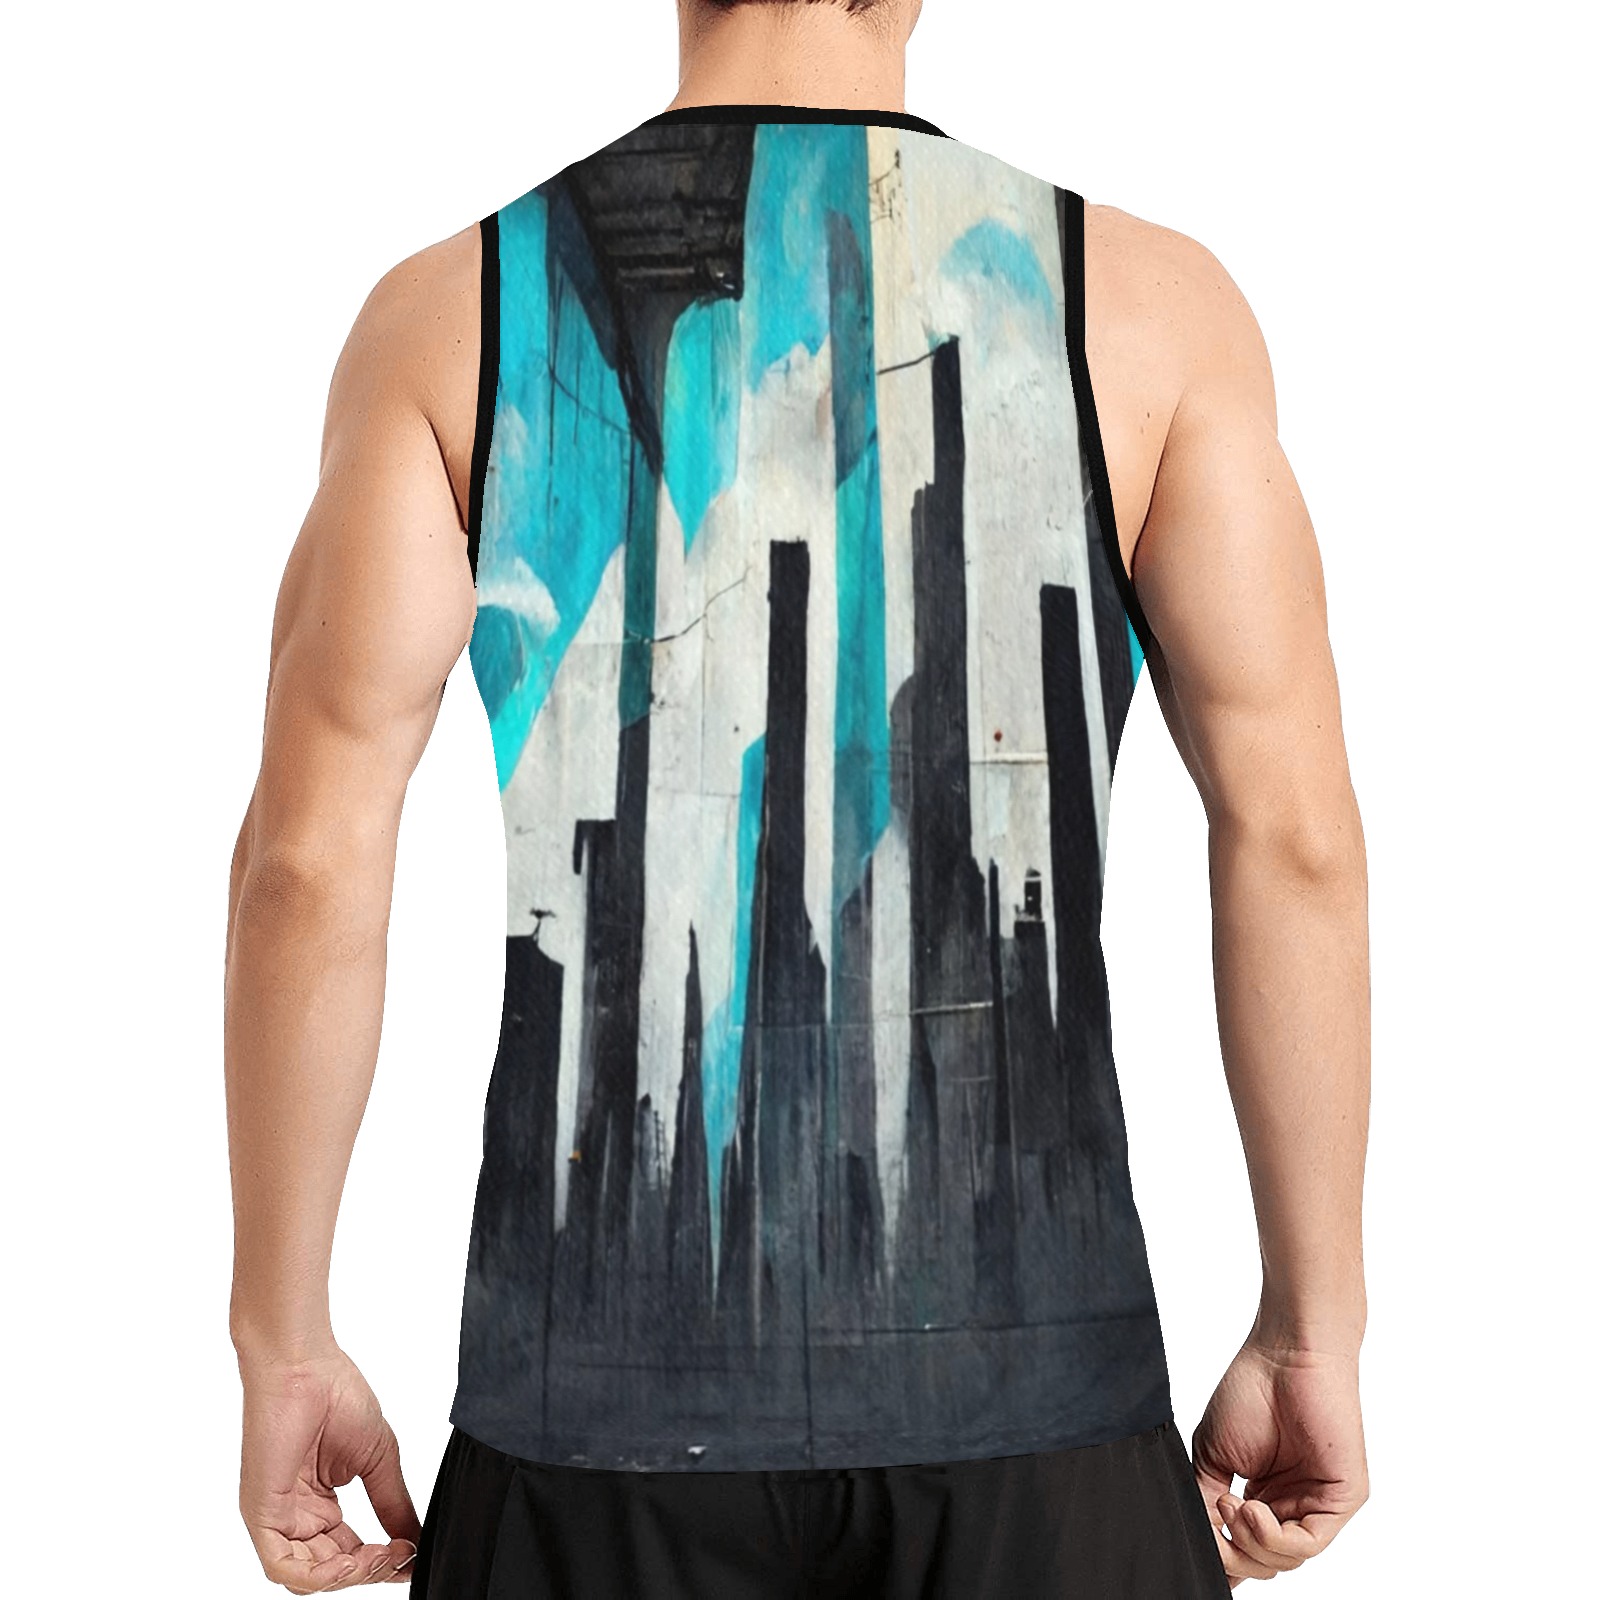 graffiti buildings turquoise and black All Over Print Basketball Jersey